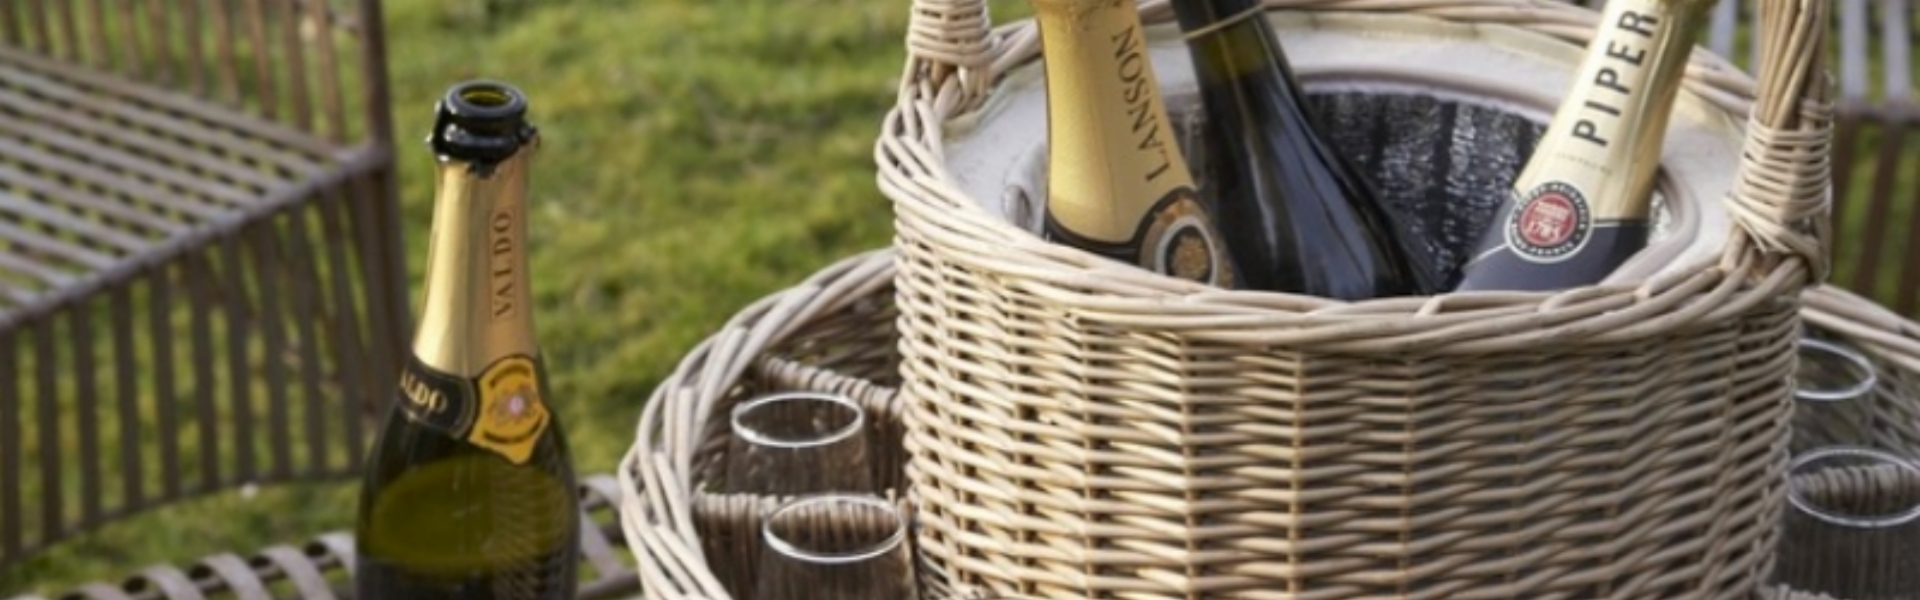 Drinks Baskets | The Willow Basket